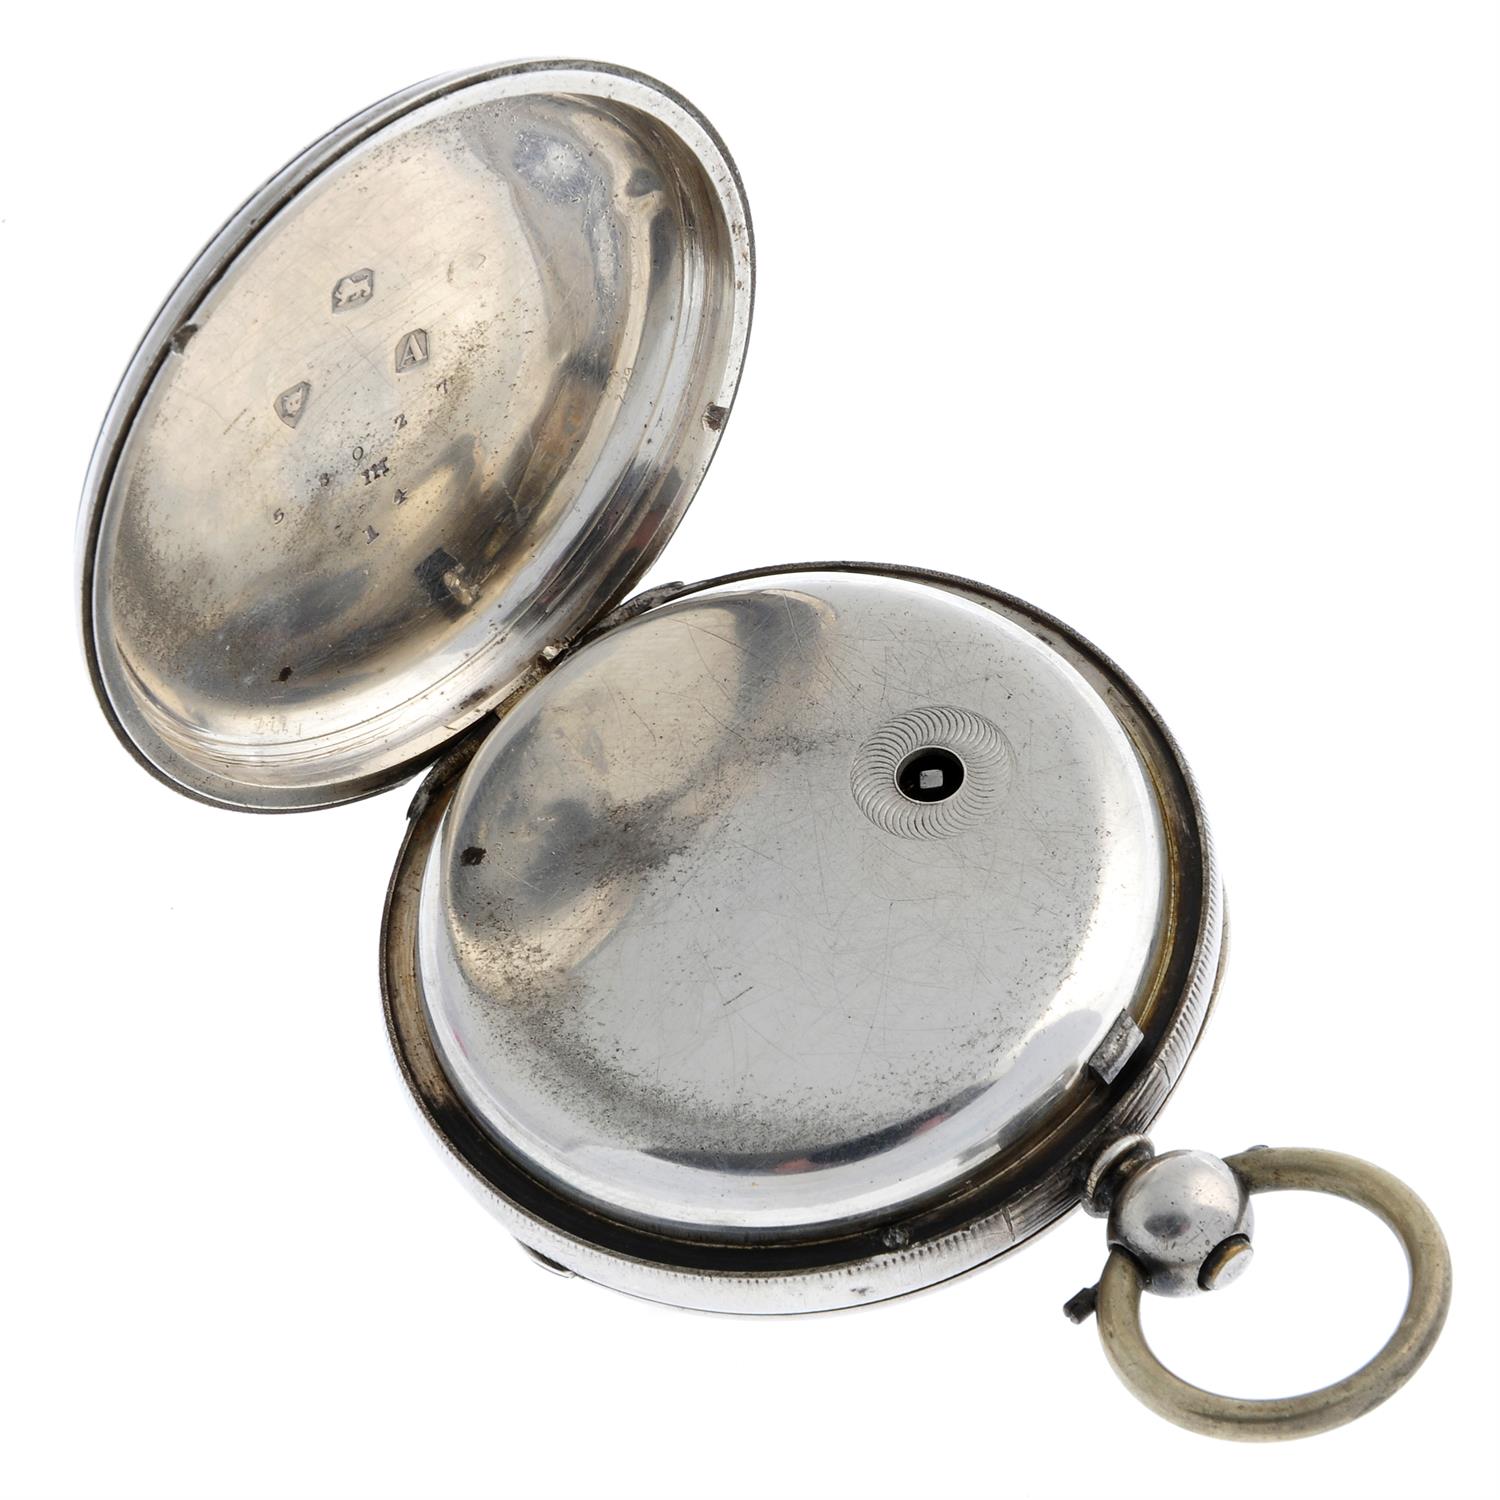 An open face pocket watch, 53mm. - Image 3 of 3